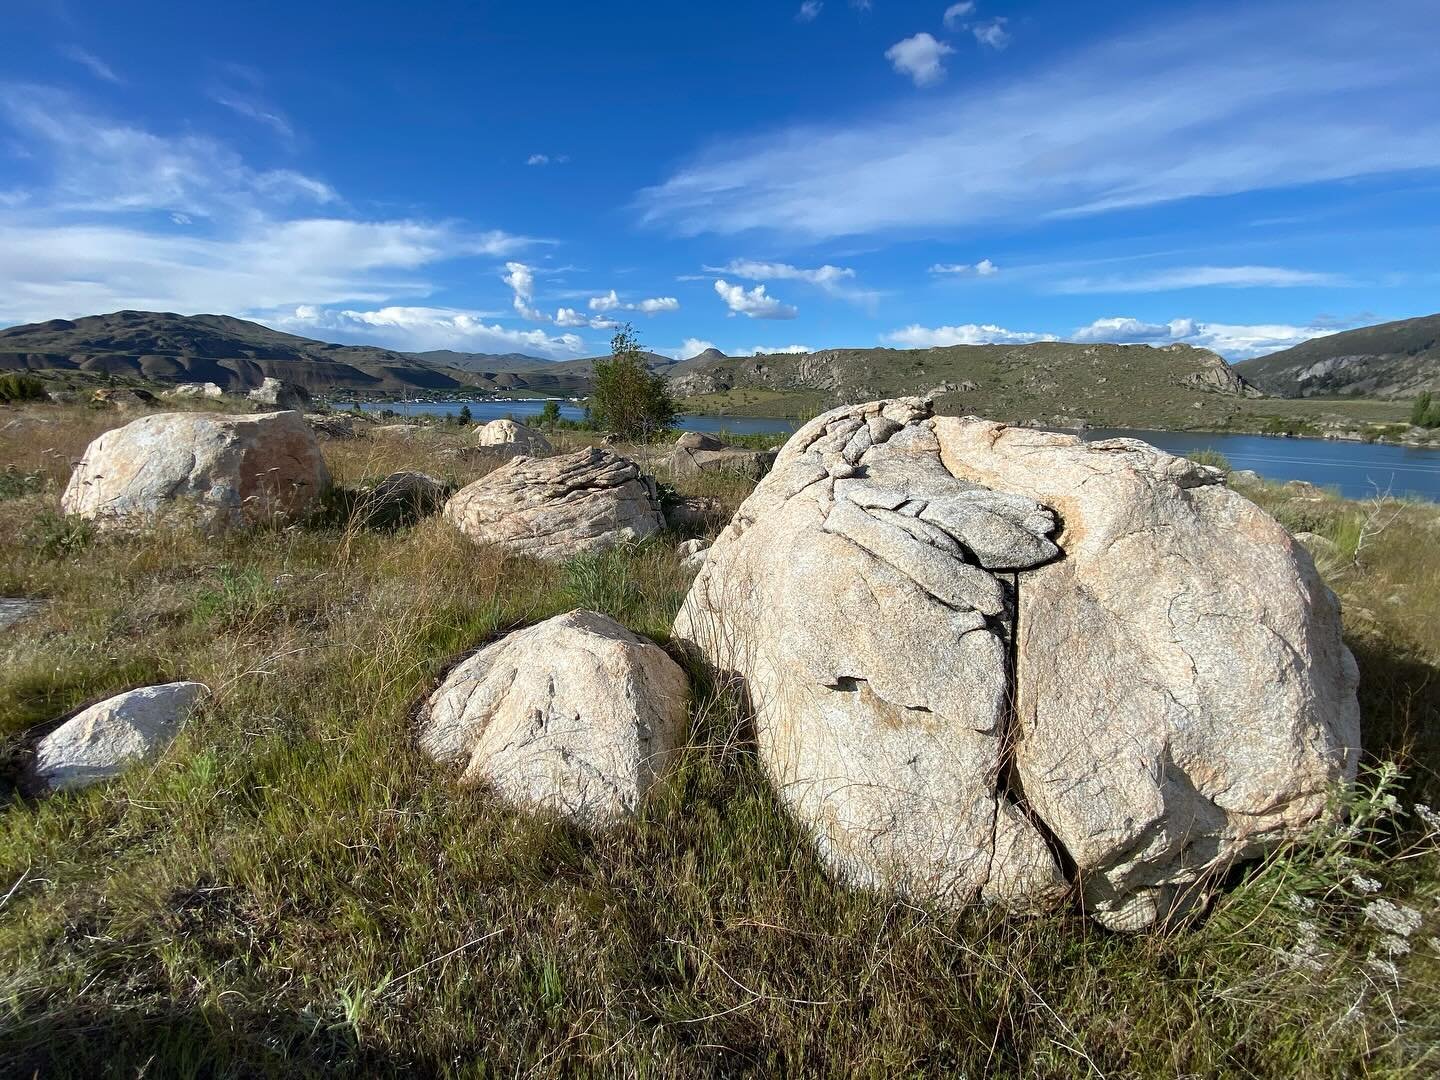 Boulders at Pateros. Ice Age Flood 14,000 years ago. @bradylawrencephoto hard at work.